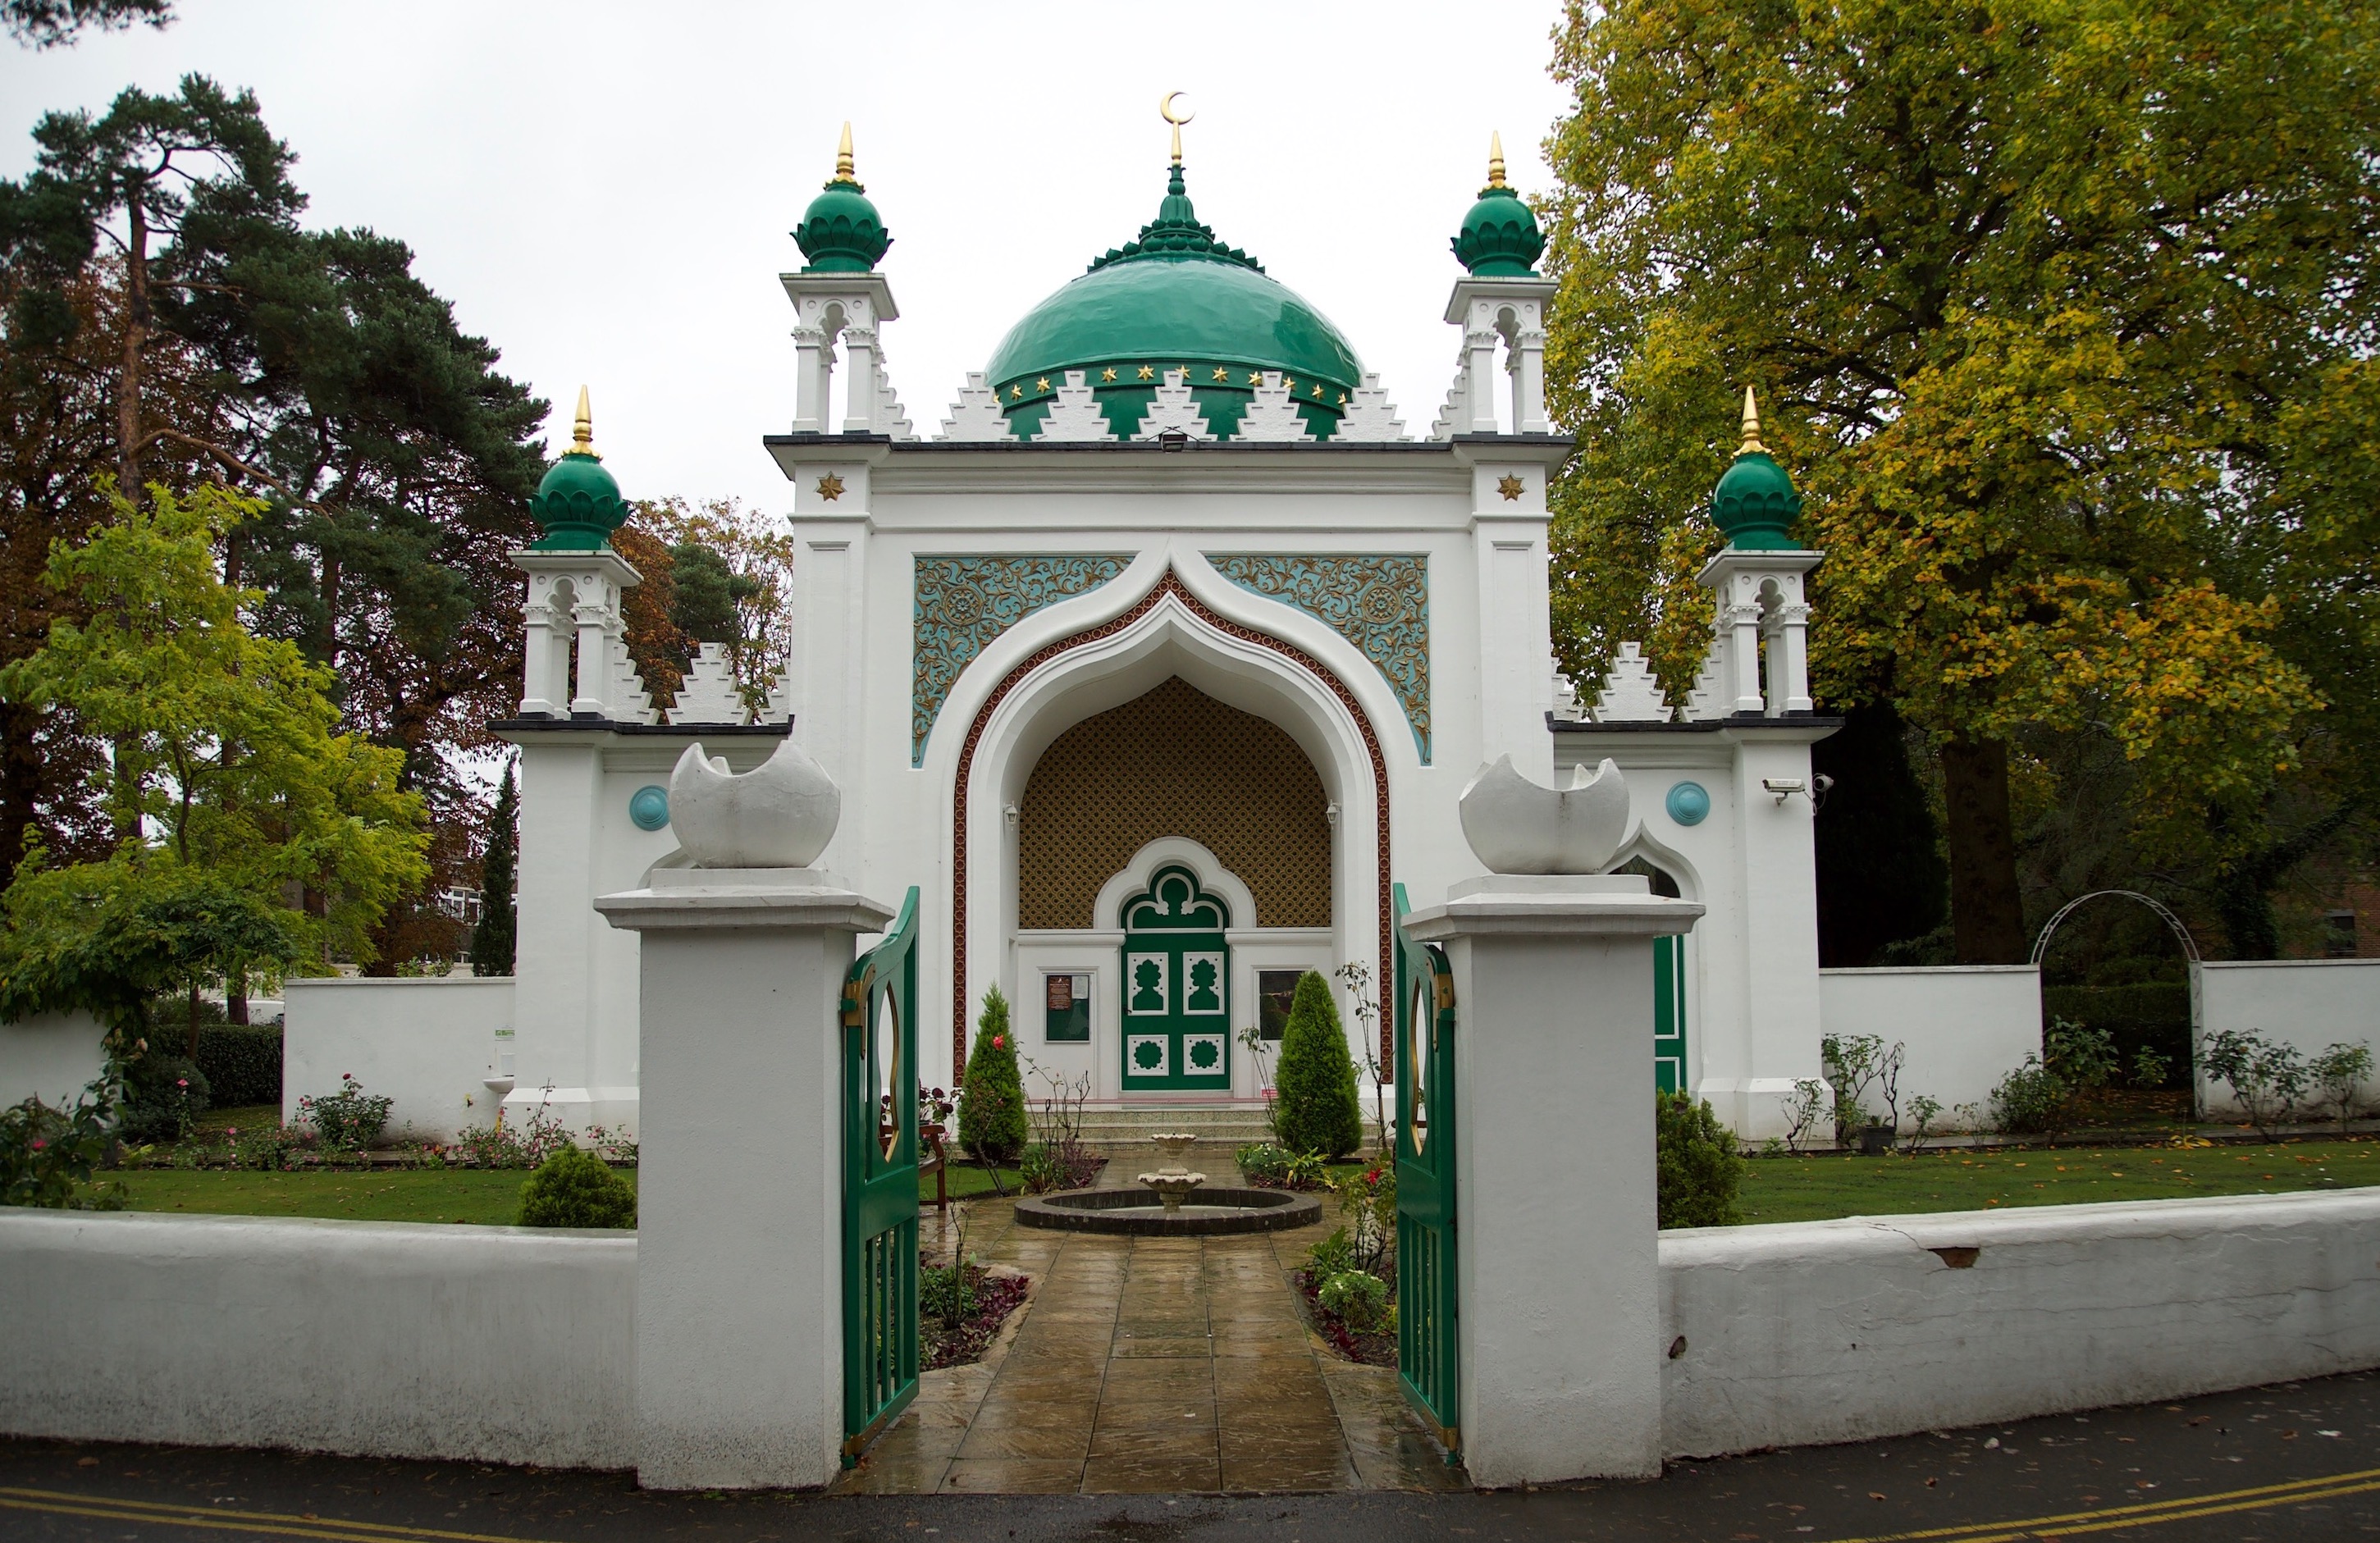 The Shah Jahan Mosque, located in Woking, Surrey, was constructed by Gottleib Wilhelm Leitner in 1889